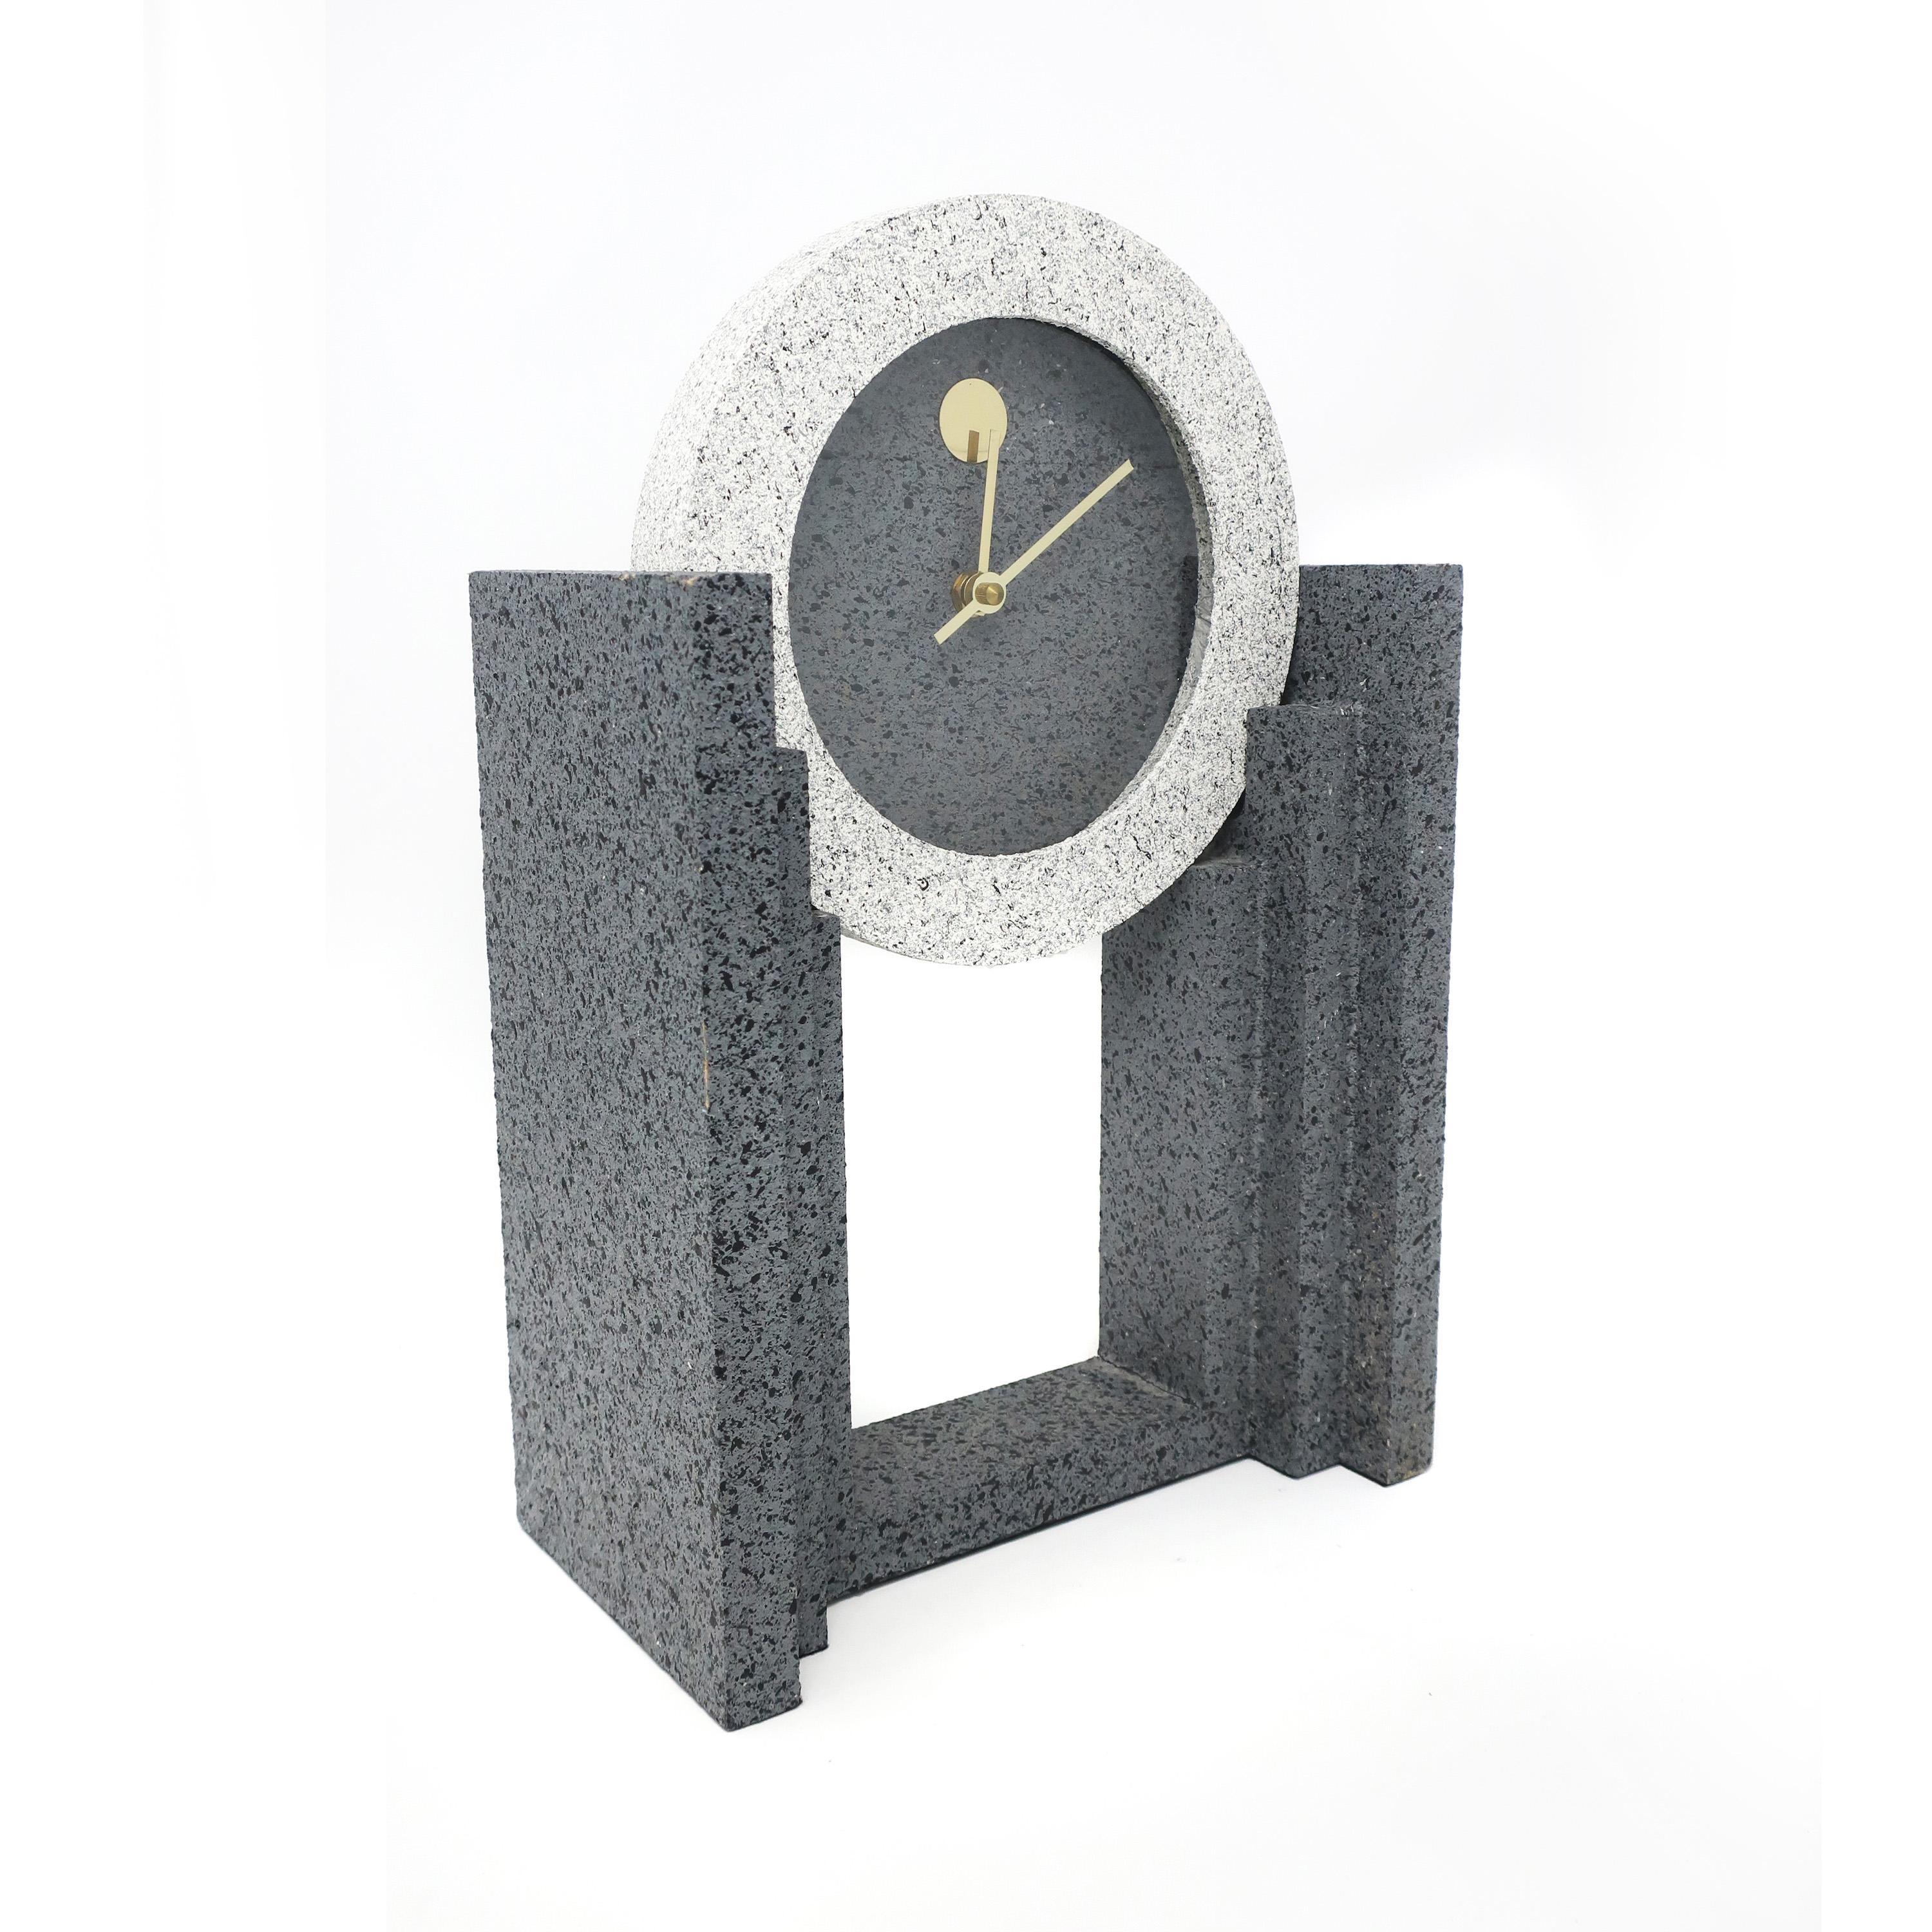 A vintage 1980s postmodern textured mantle clock by Empire Art Products in various shades of spelled gray with brass hands. In very good vintage condition and works well.

Measures: 9.5